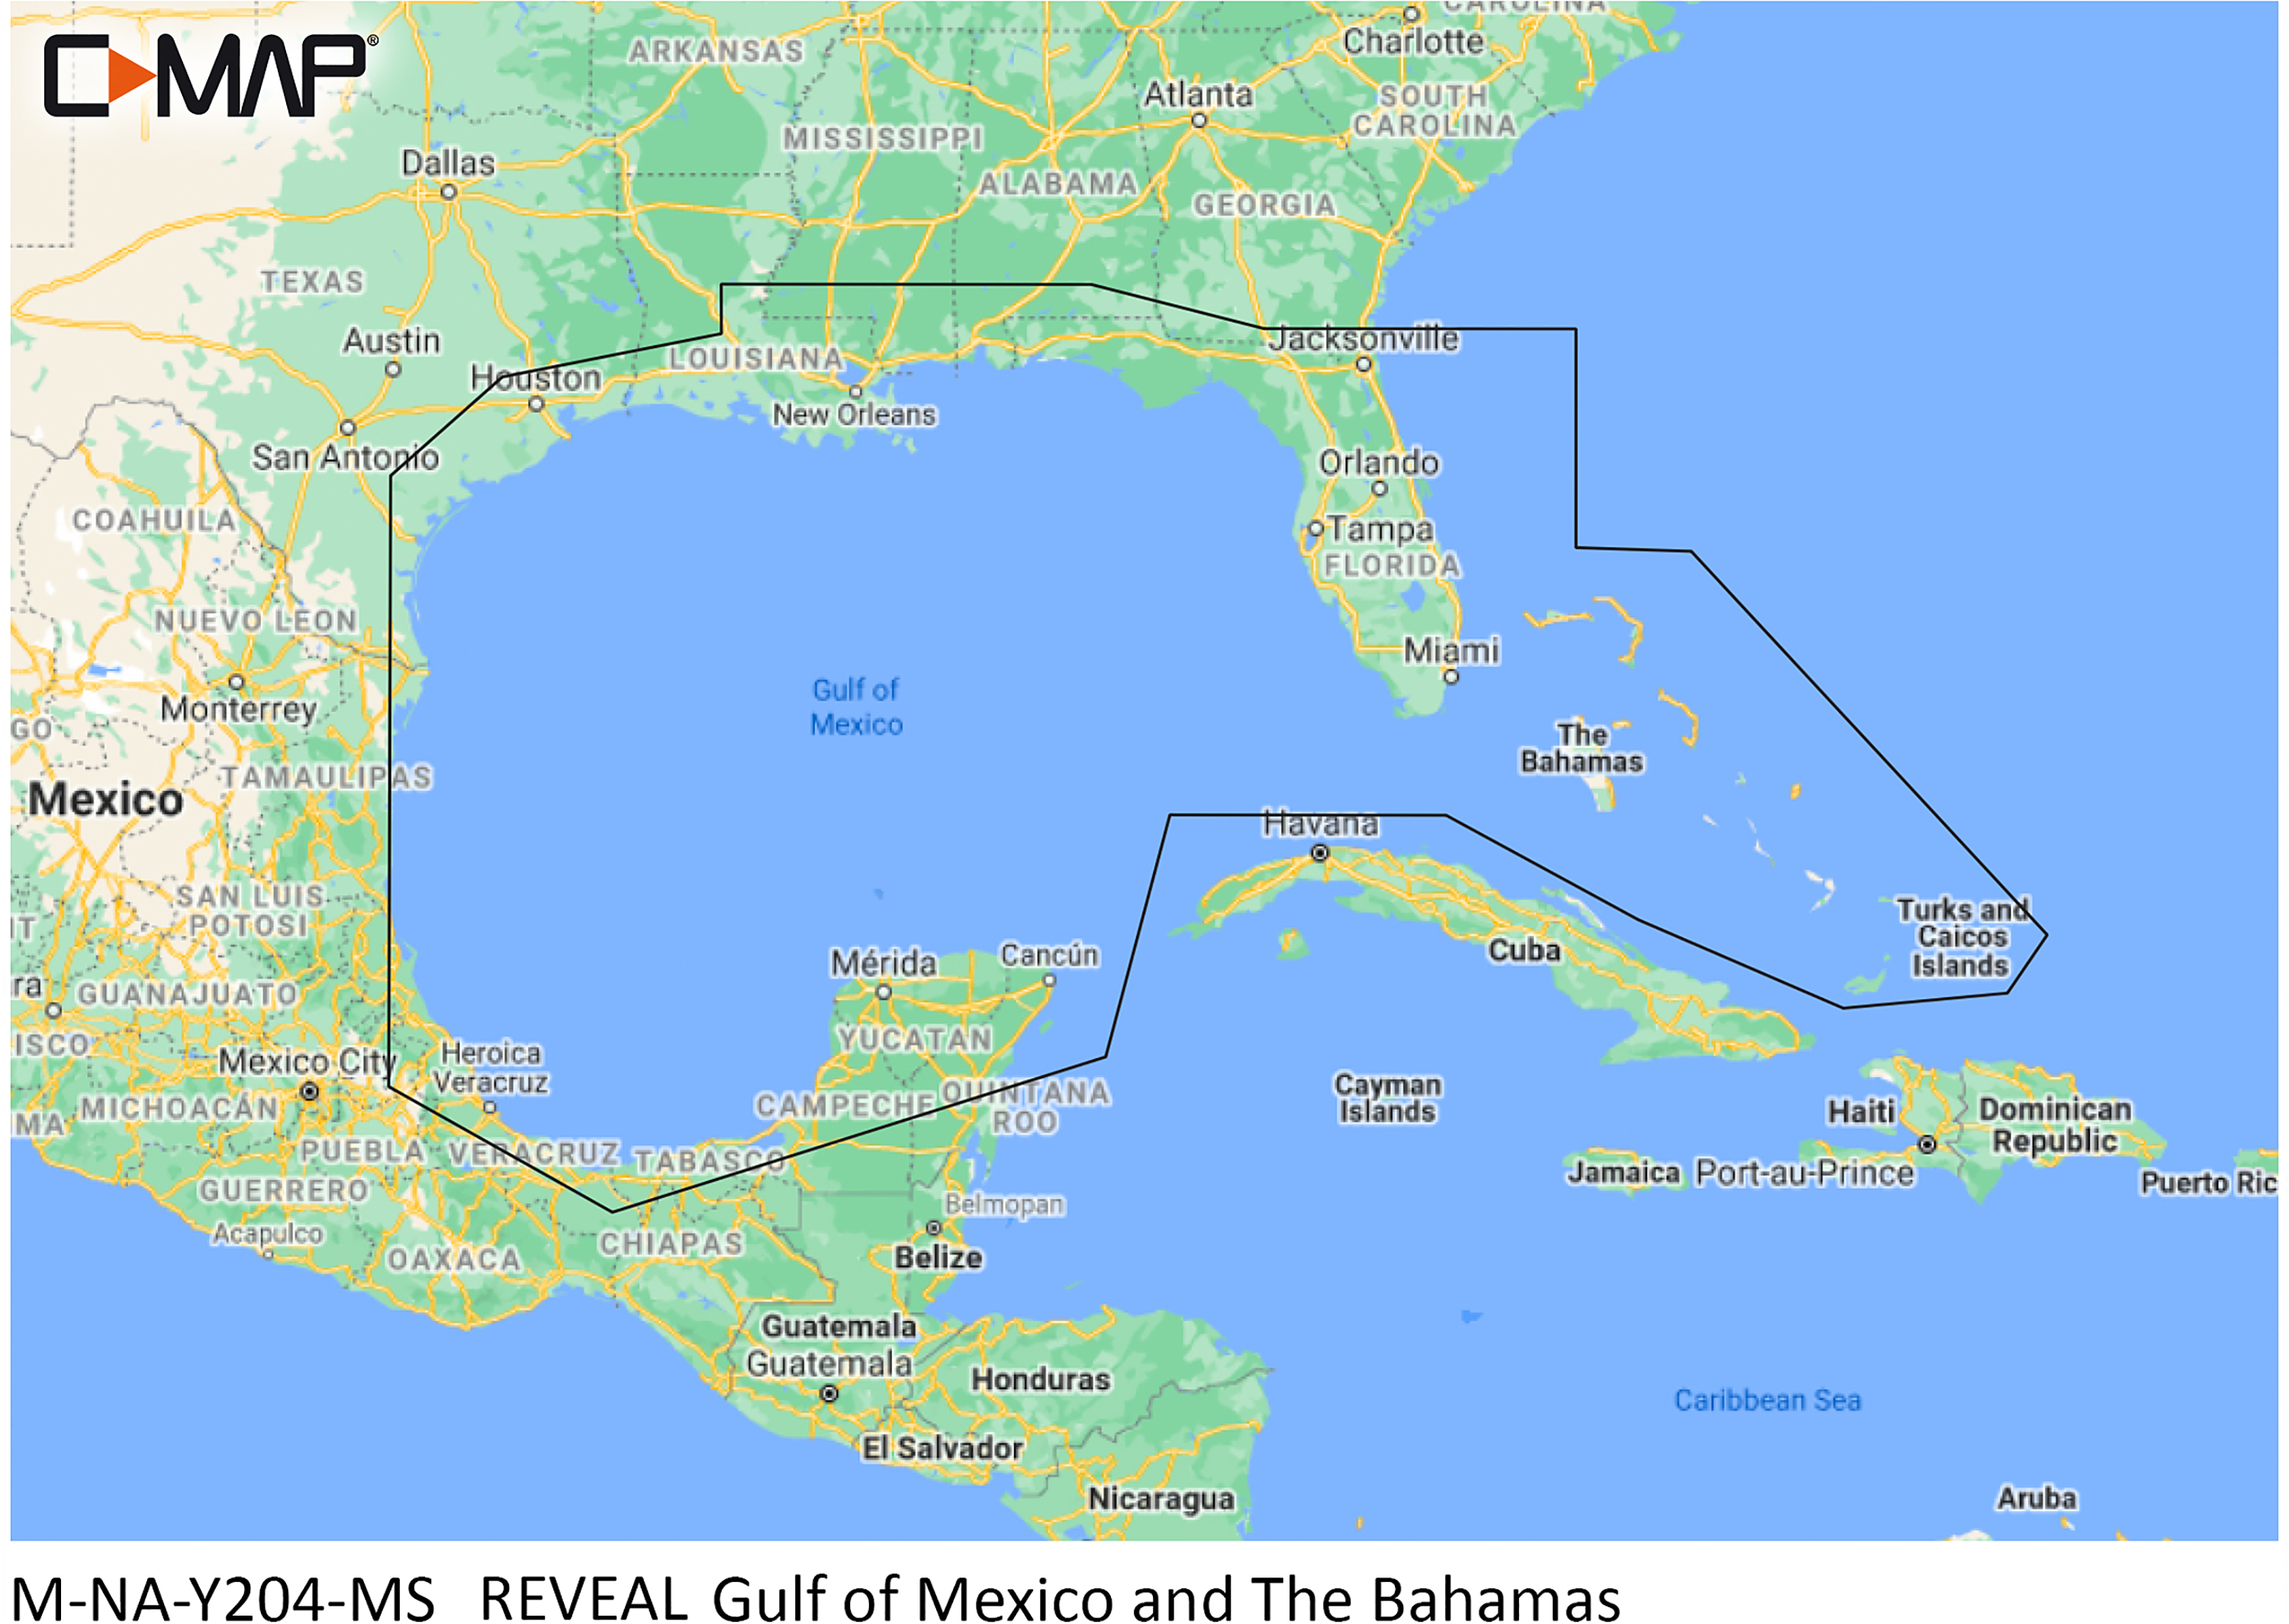 C-MAP Reveal SD Card Map Chart - Gulf of Mexico to Bahamas